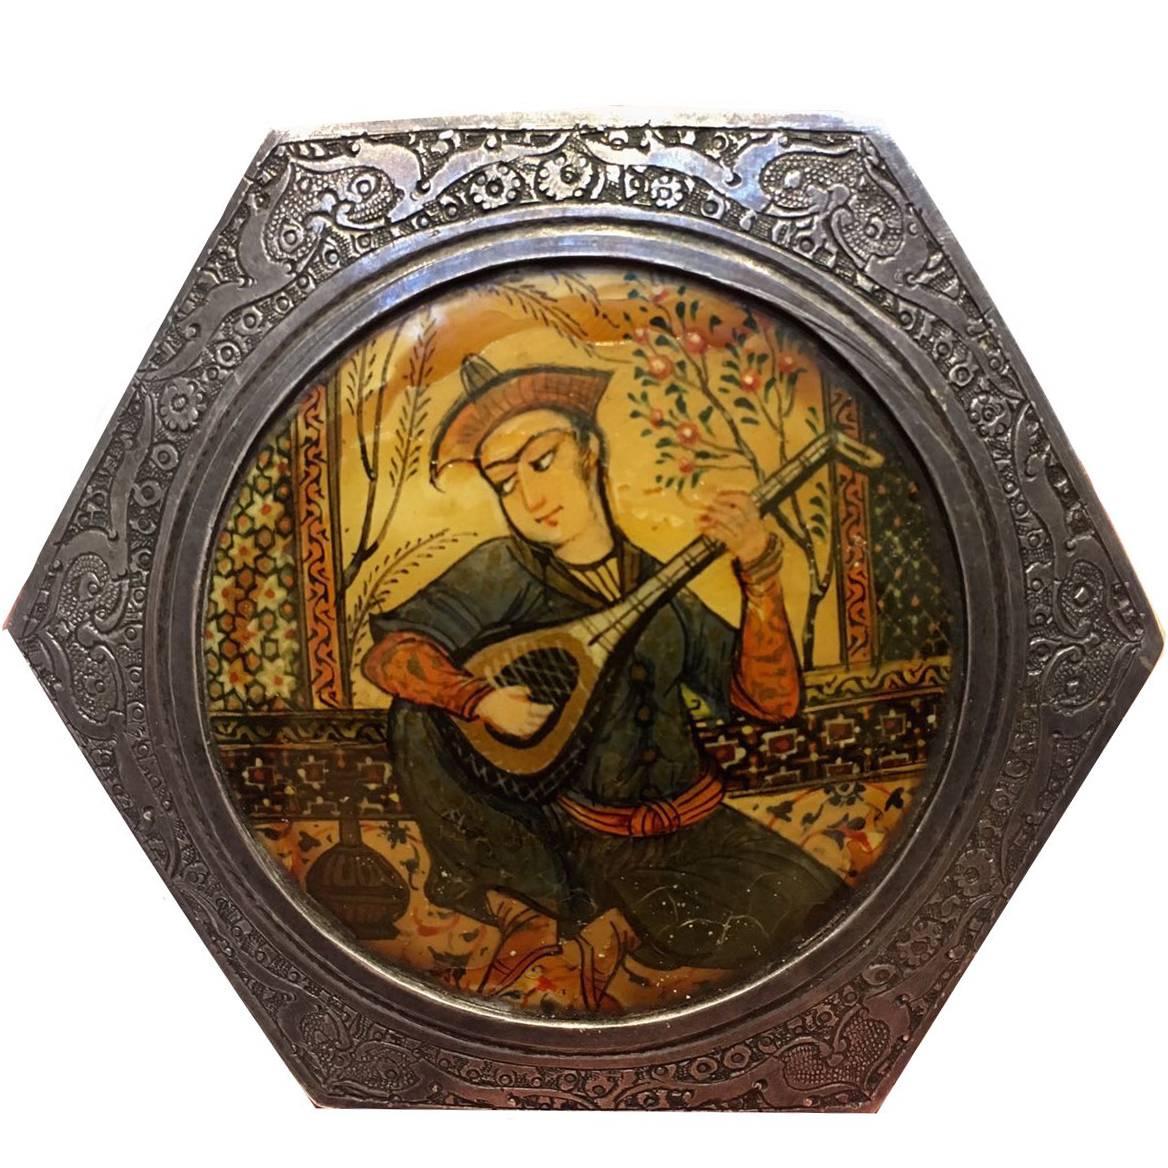 20th Century, Engraved Silver Box with a Qajari Musician on the Top For Sale